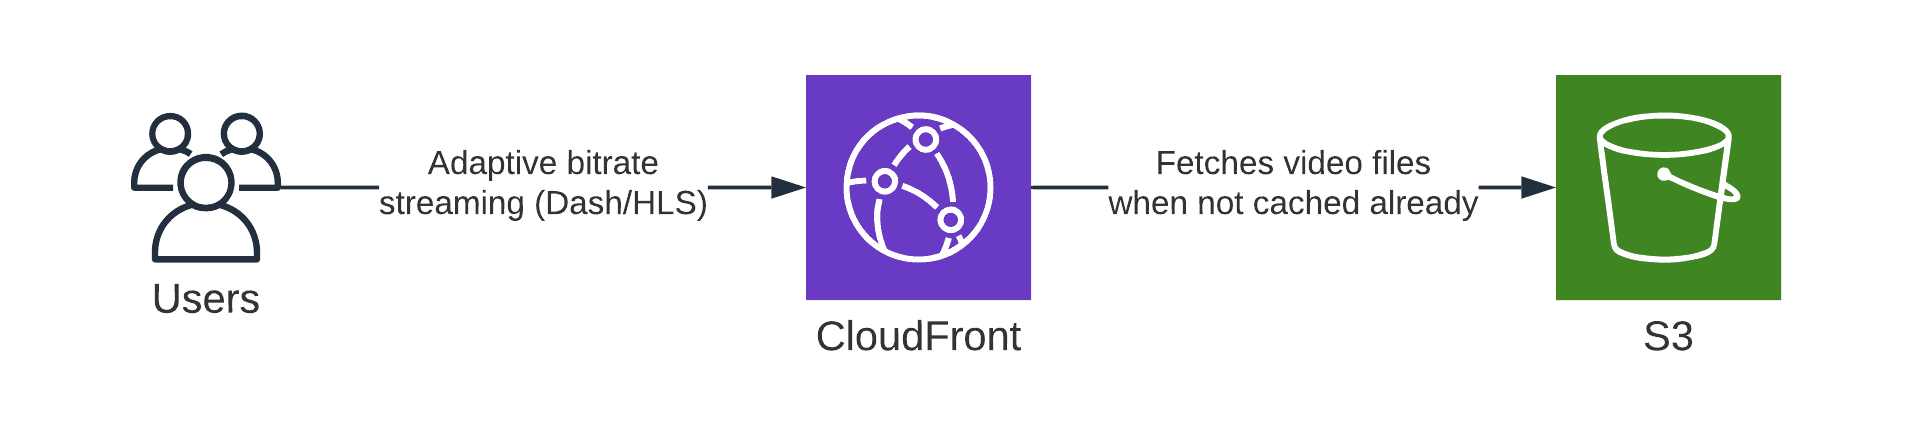 CloudFront is a Content Delivery Network (CDN) to distribute your video files globally